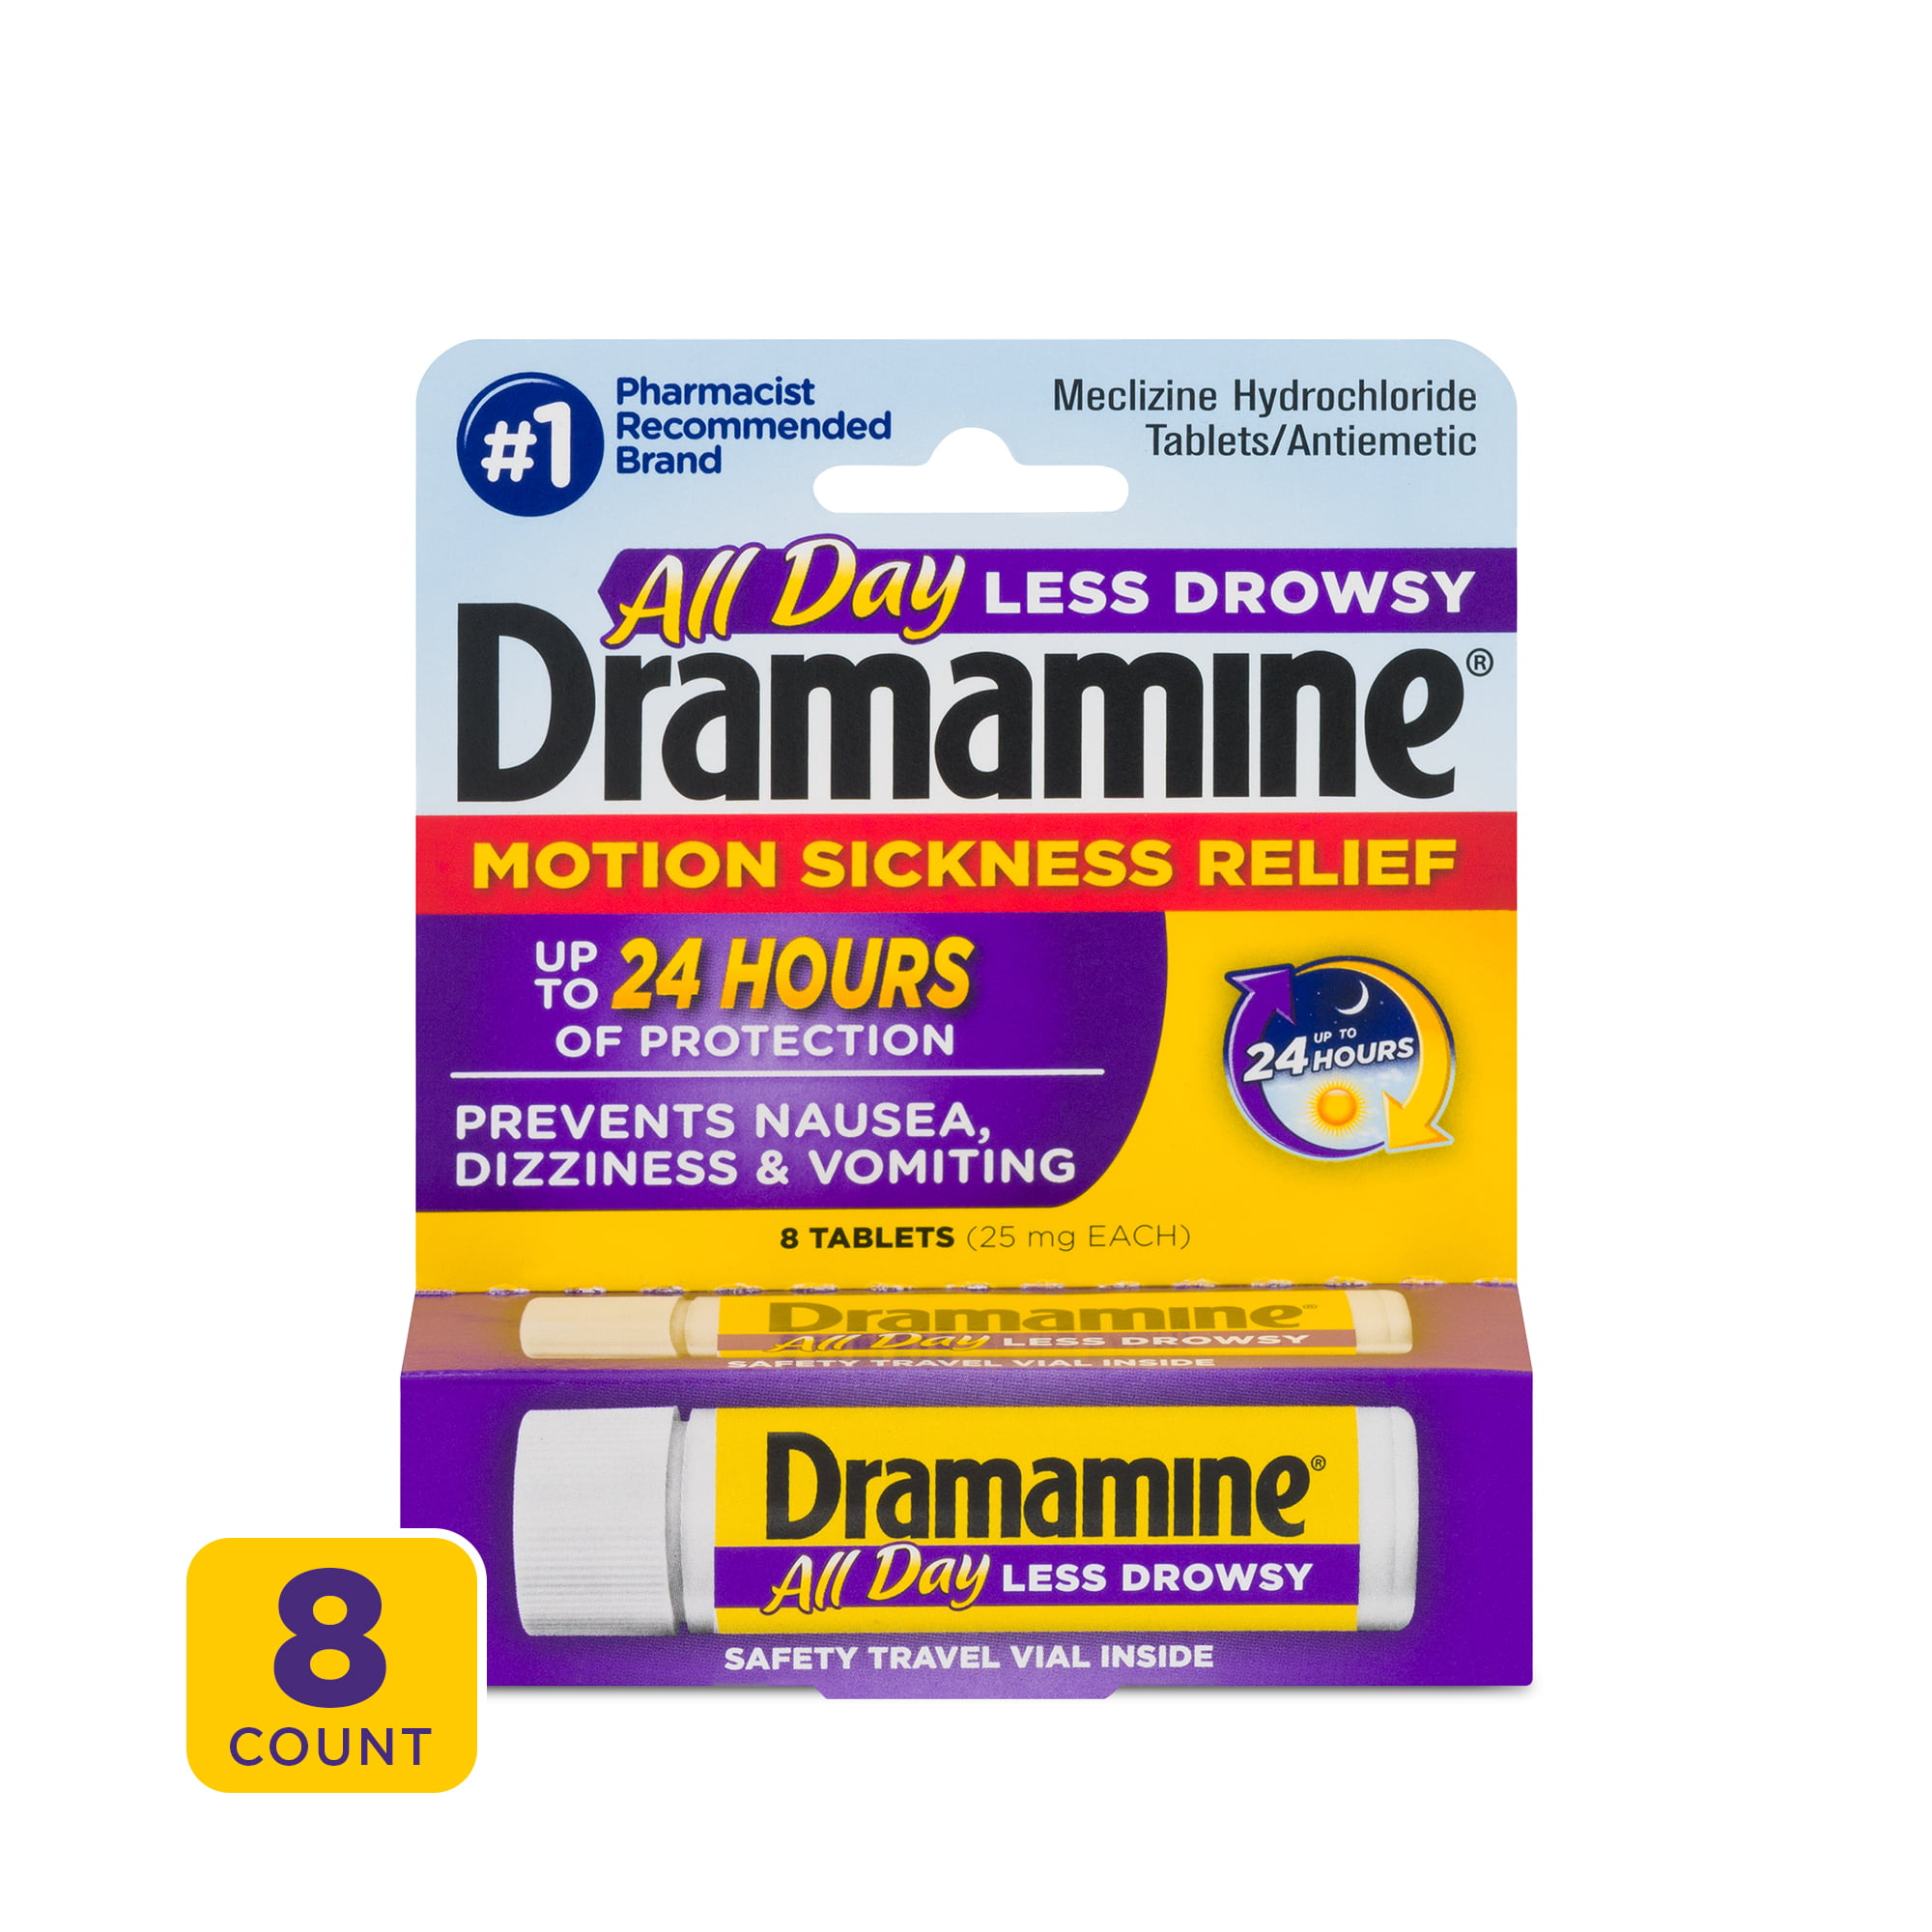 is meclizine less drowsy than dramamine